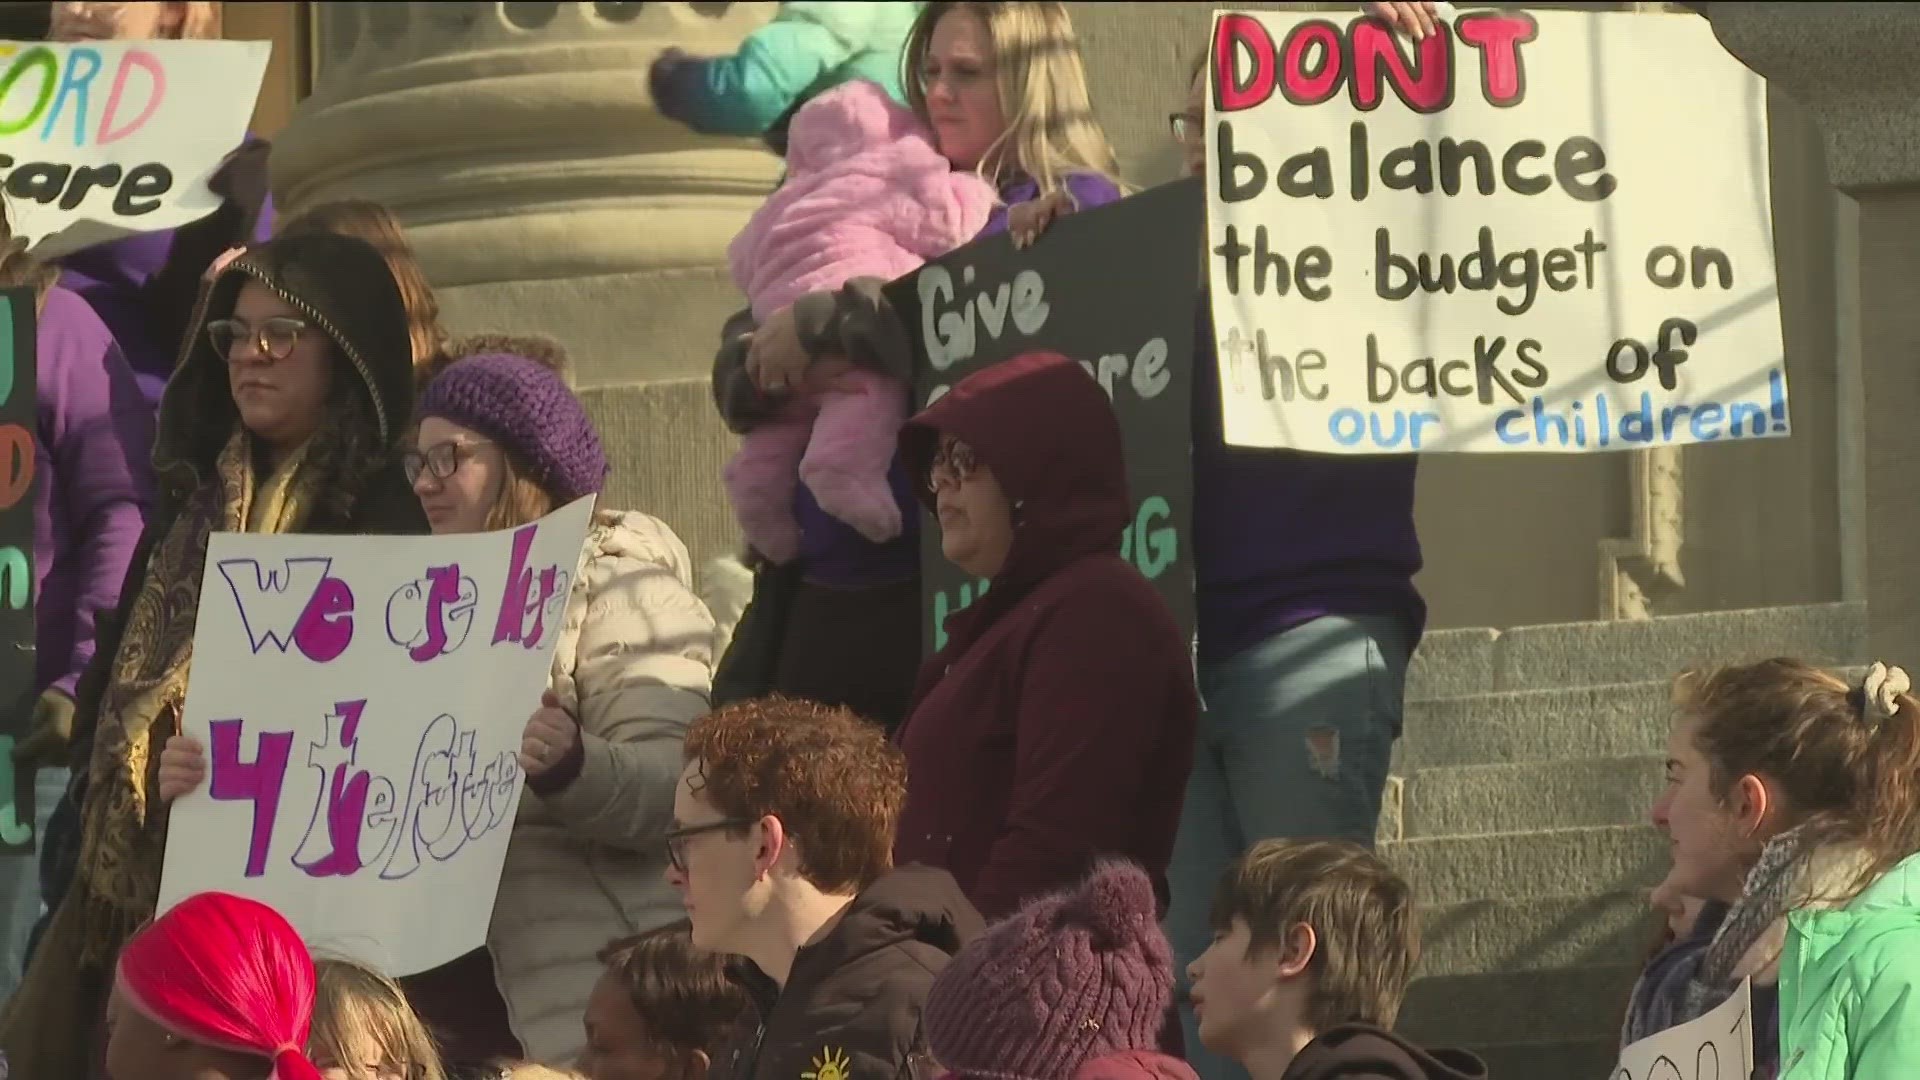 There is $43 million left over from federal pandemic funds, but Idaho lawmakers may not accept the money - childcare workers rally and vocalize their concerns.